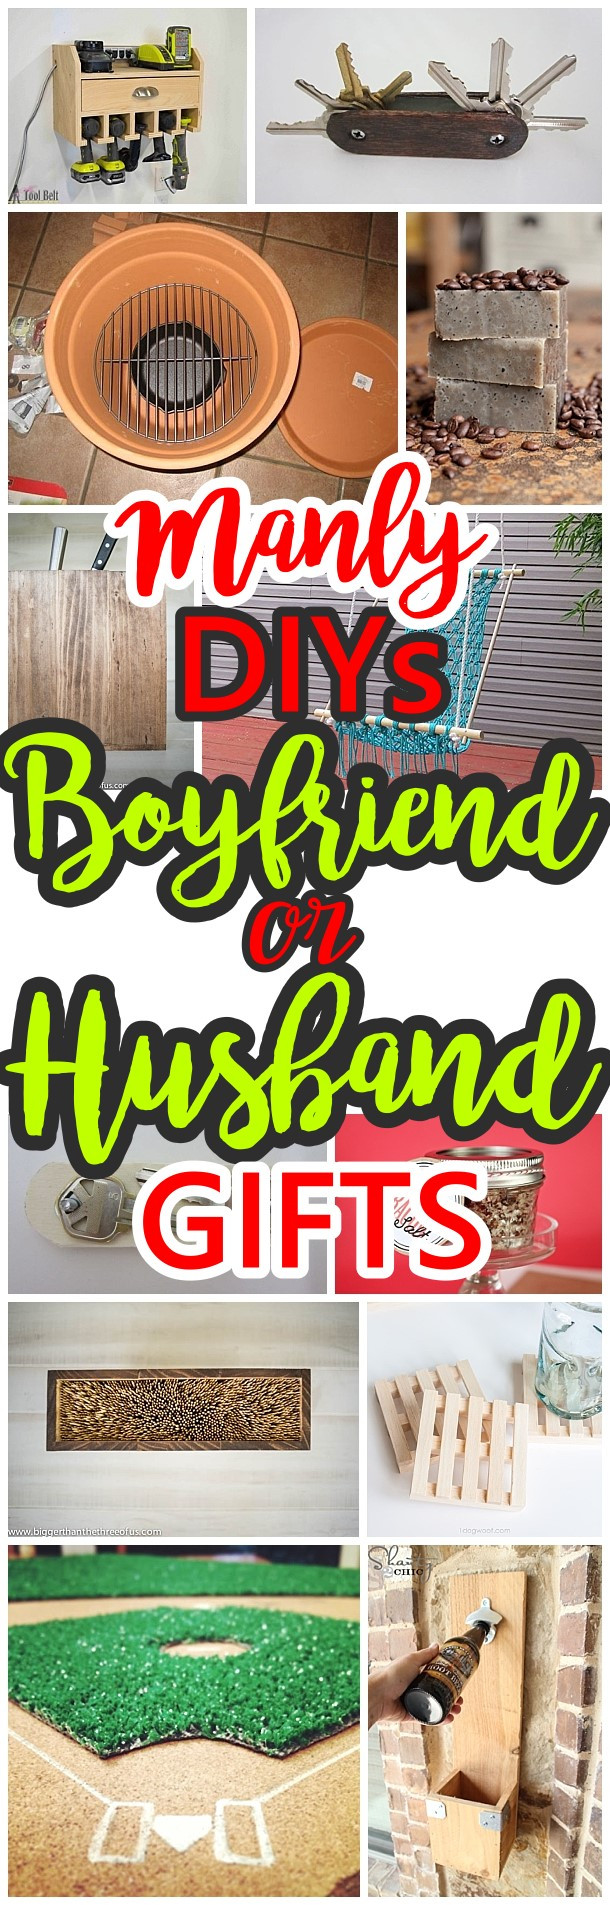 Mother'S Day Gift Ideas From Husband
 Manly Do It Yourself Boyfriend and Husband Gift Ideas